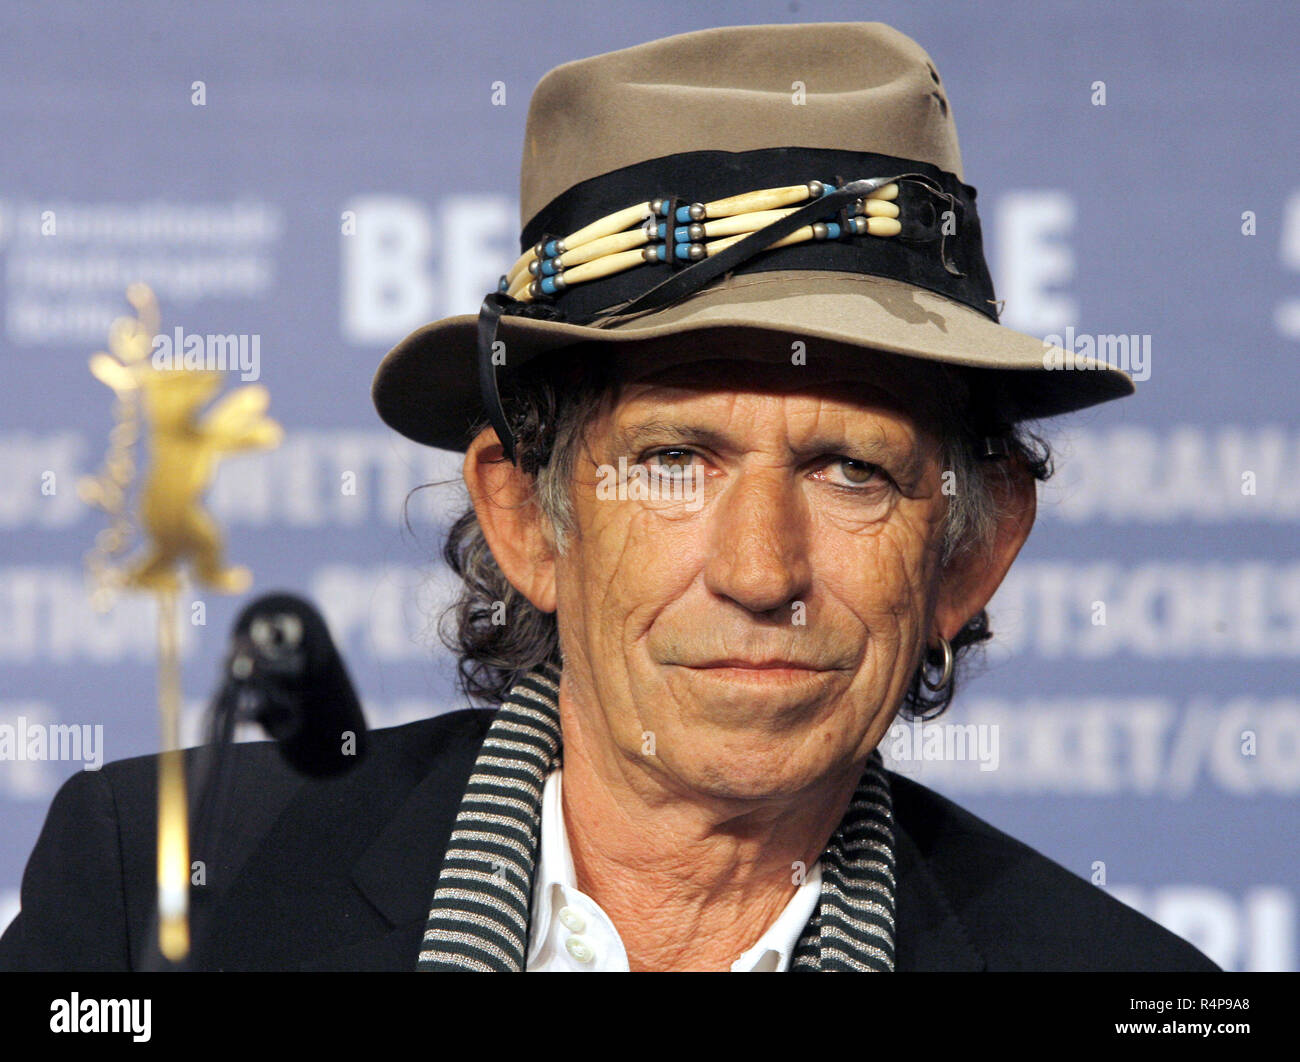 A file picture taken on 7 February 2008 shows Rolling Stones guitarist Keith Richards in Berlin, Germany. Richards won the title of the 'writer of the year' at the 'GQ Men of the Year Awards' ceremony at London Royal Opera House on 6 September 2011. Richards had published his autobiography 'Life' that talks about rock and roll lifestyle, drugs and music. Photo: Tim Brakemeier | usage worldwide Stock Photo